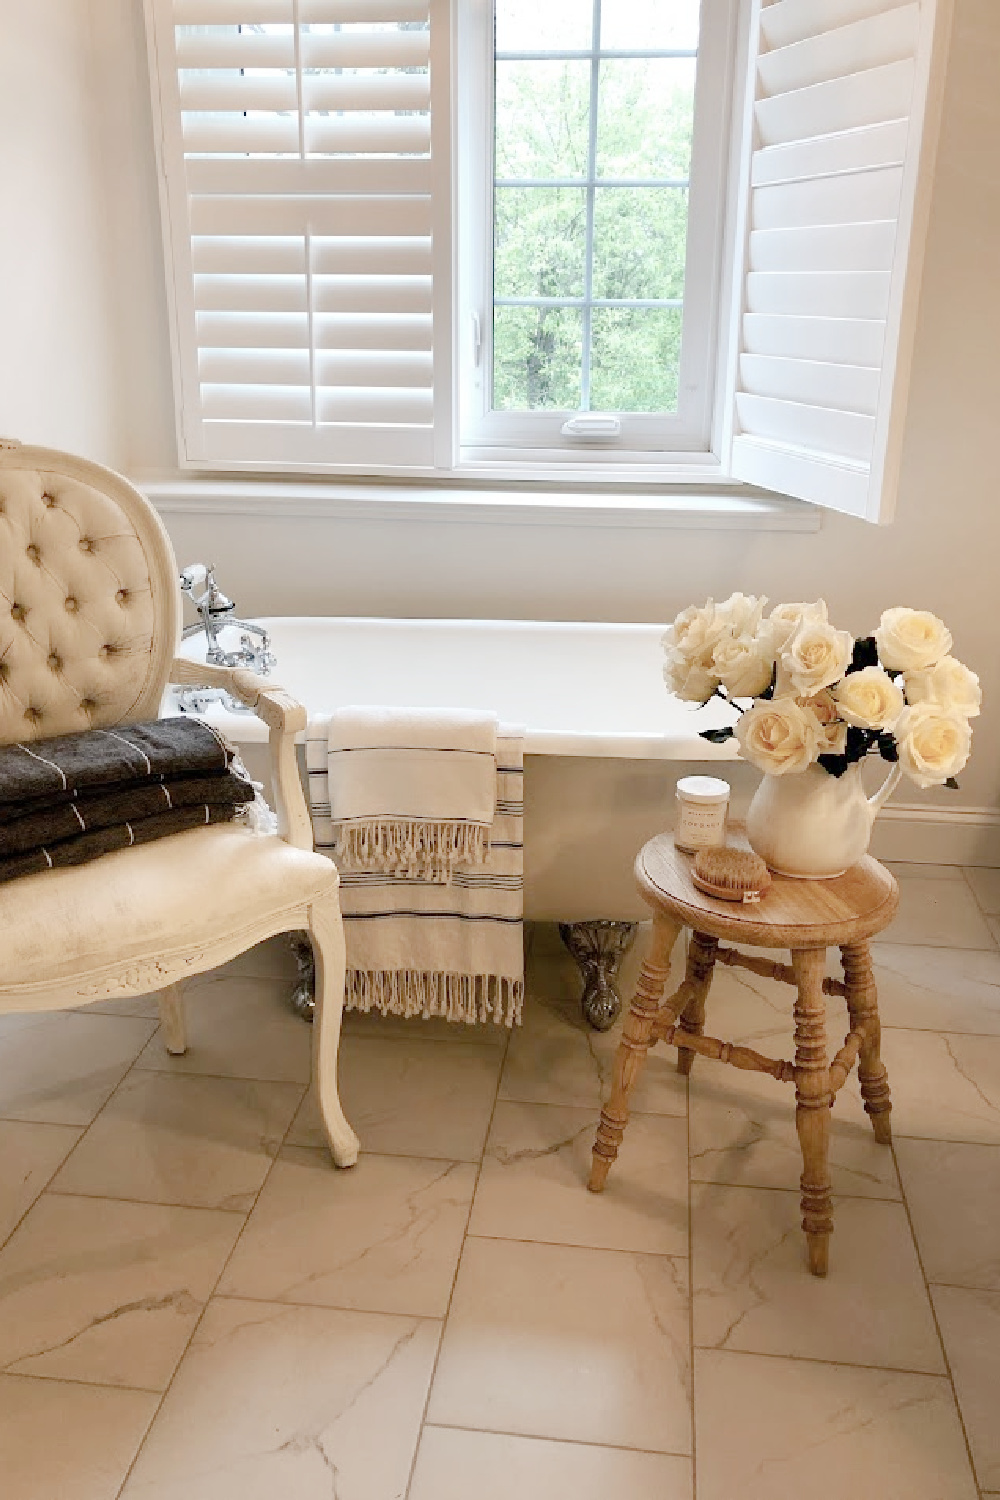 French country white bathroom with maids tub, accent stool, and white roses - Hello Lovely.